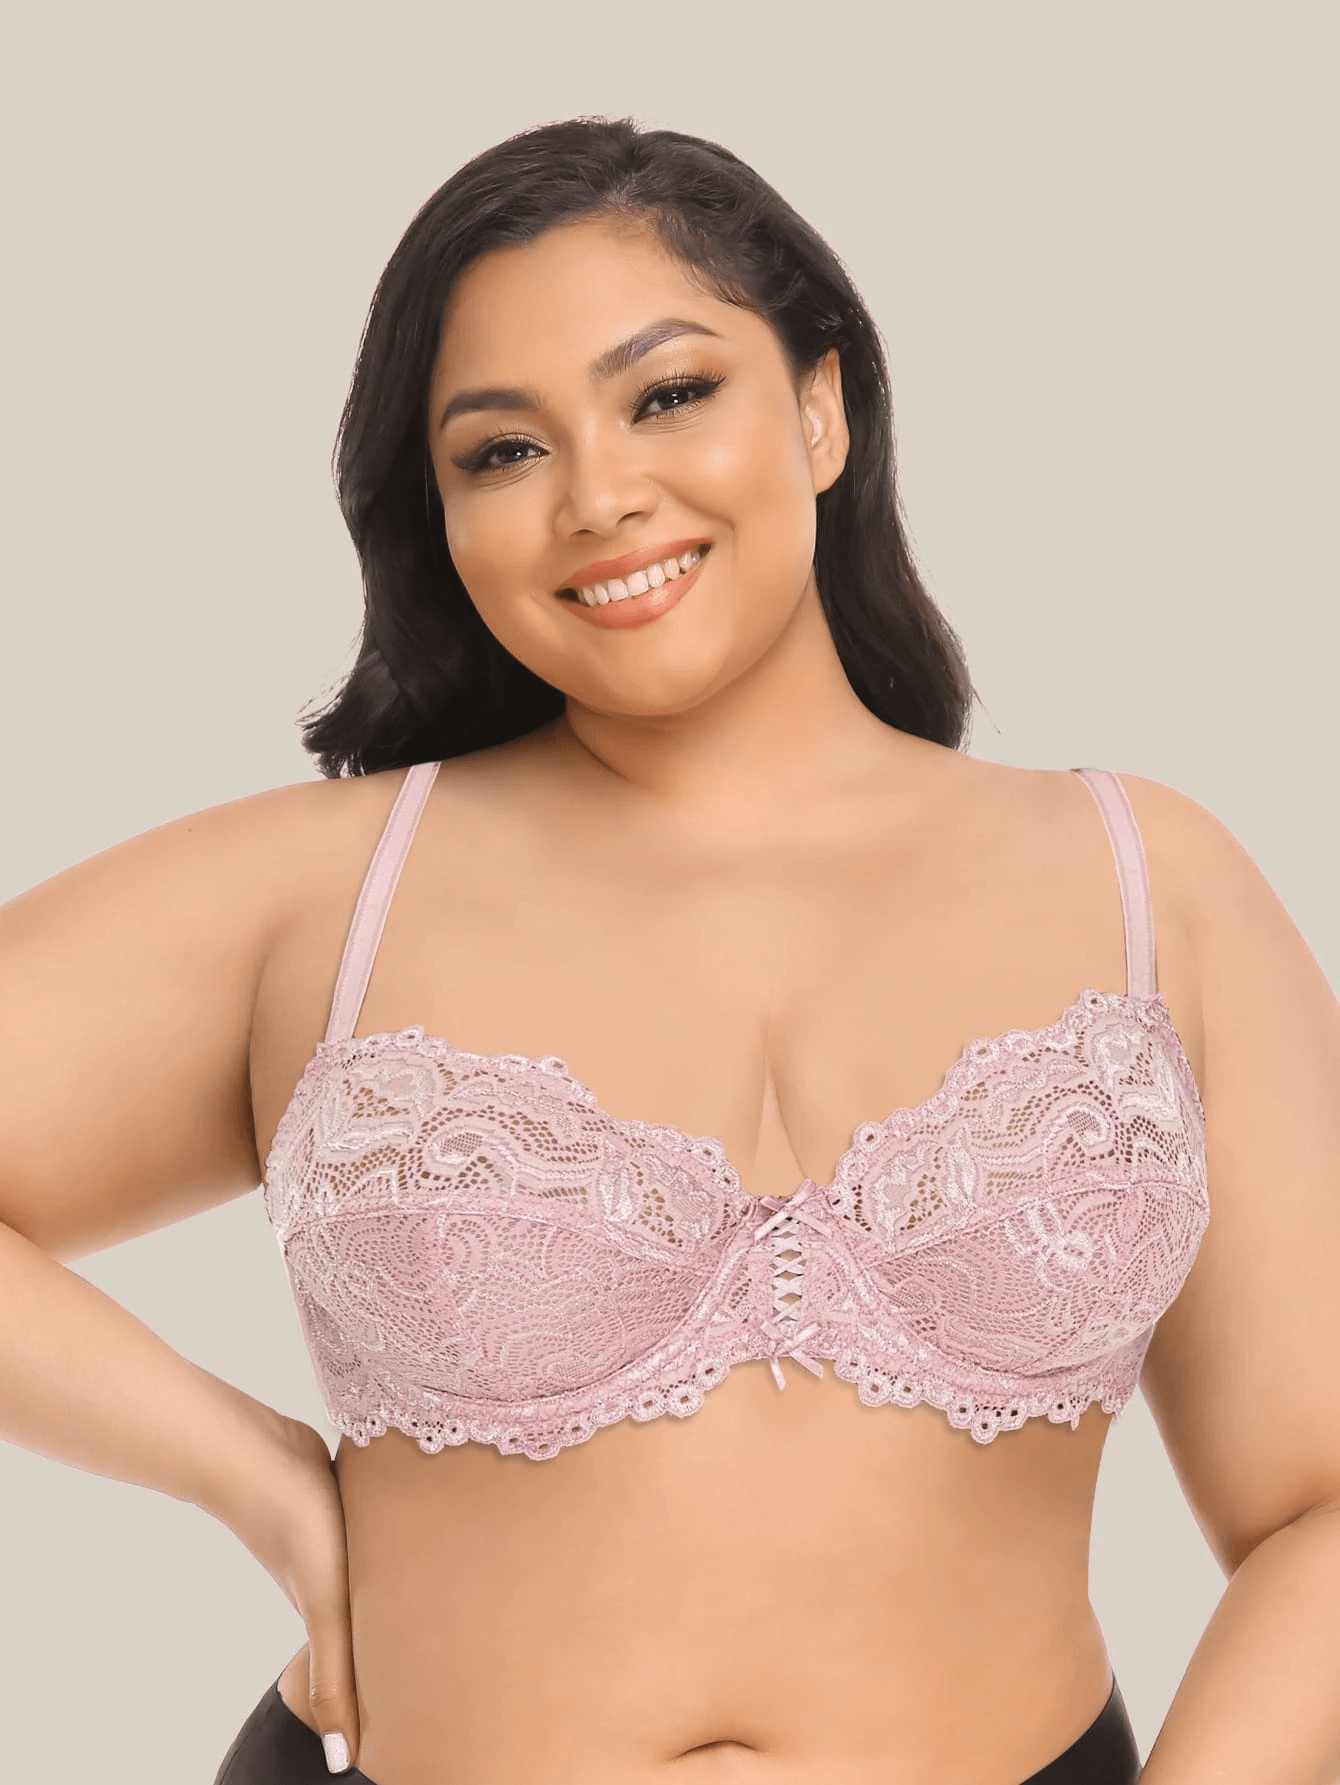 Buy WingsLove Women's Floral Lace Soft Cup Underwired Bra Unlined